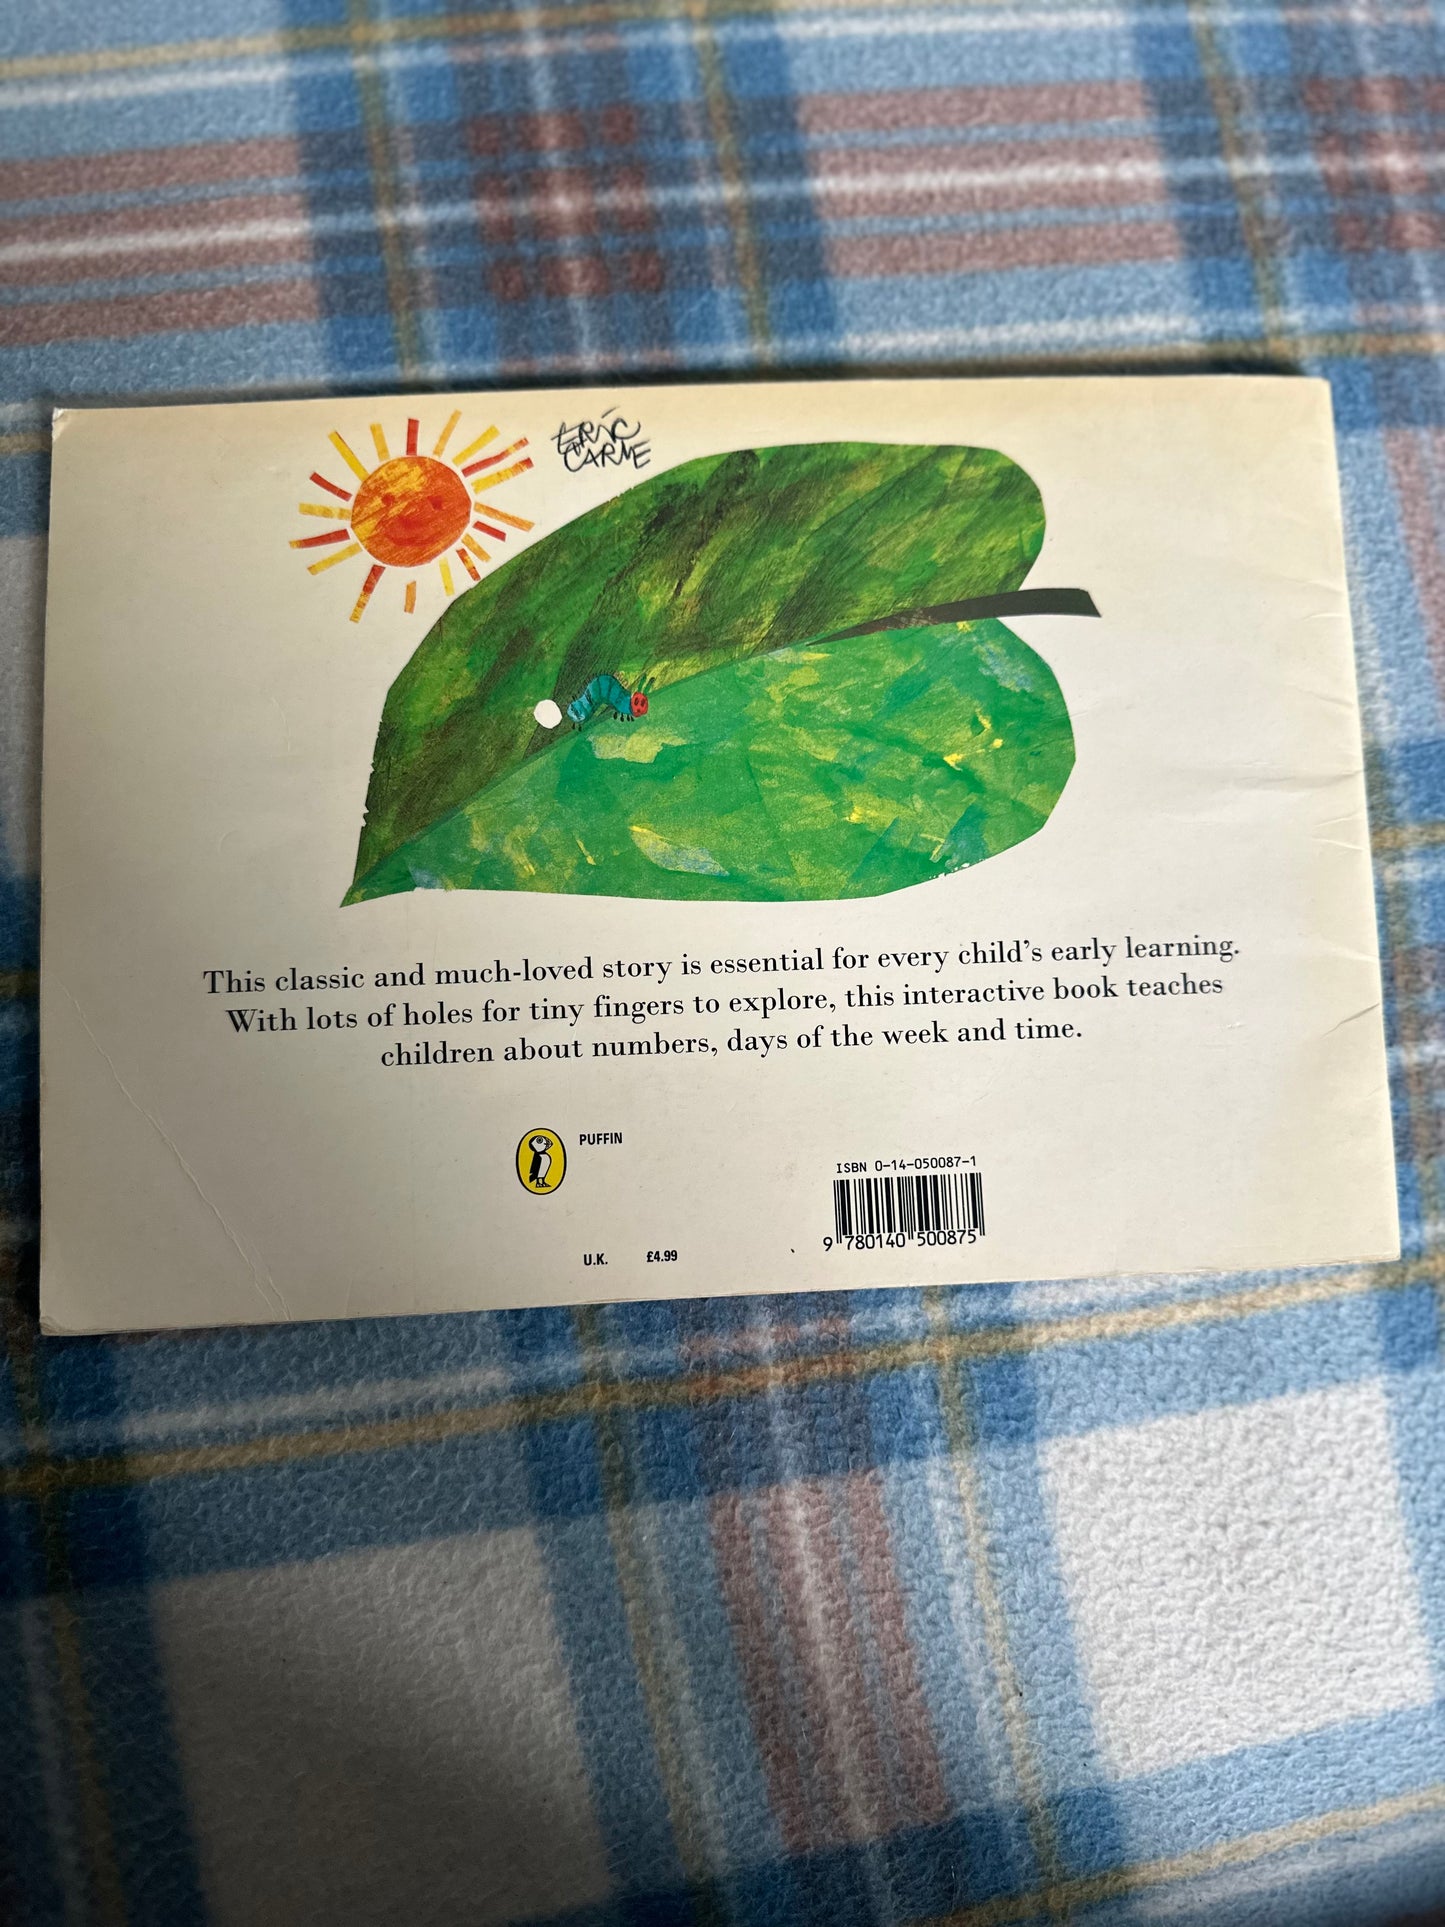 1974 The Very Hungry Caterpillar - Eric Carle(Puffin Books) 58th impression